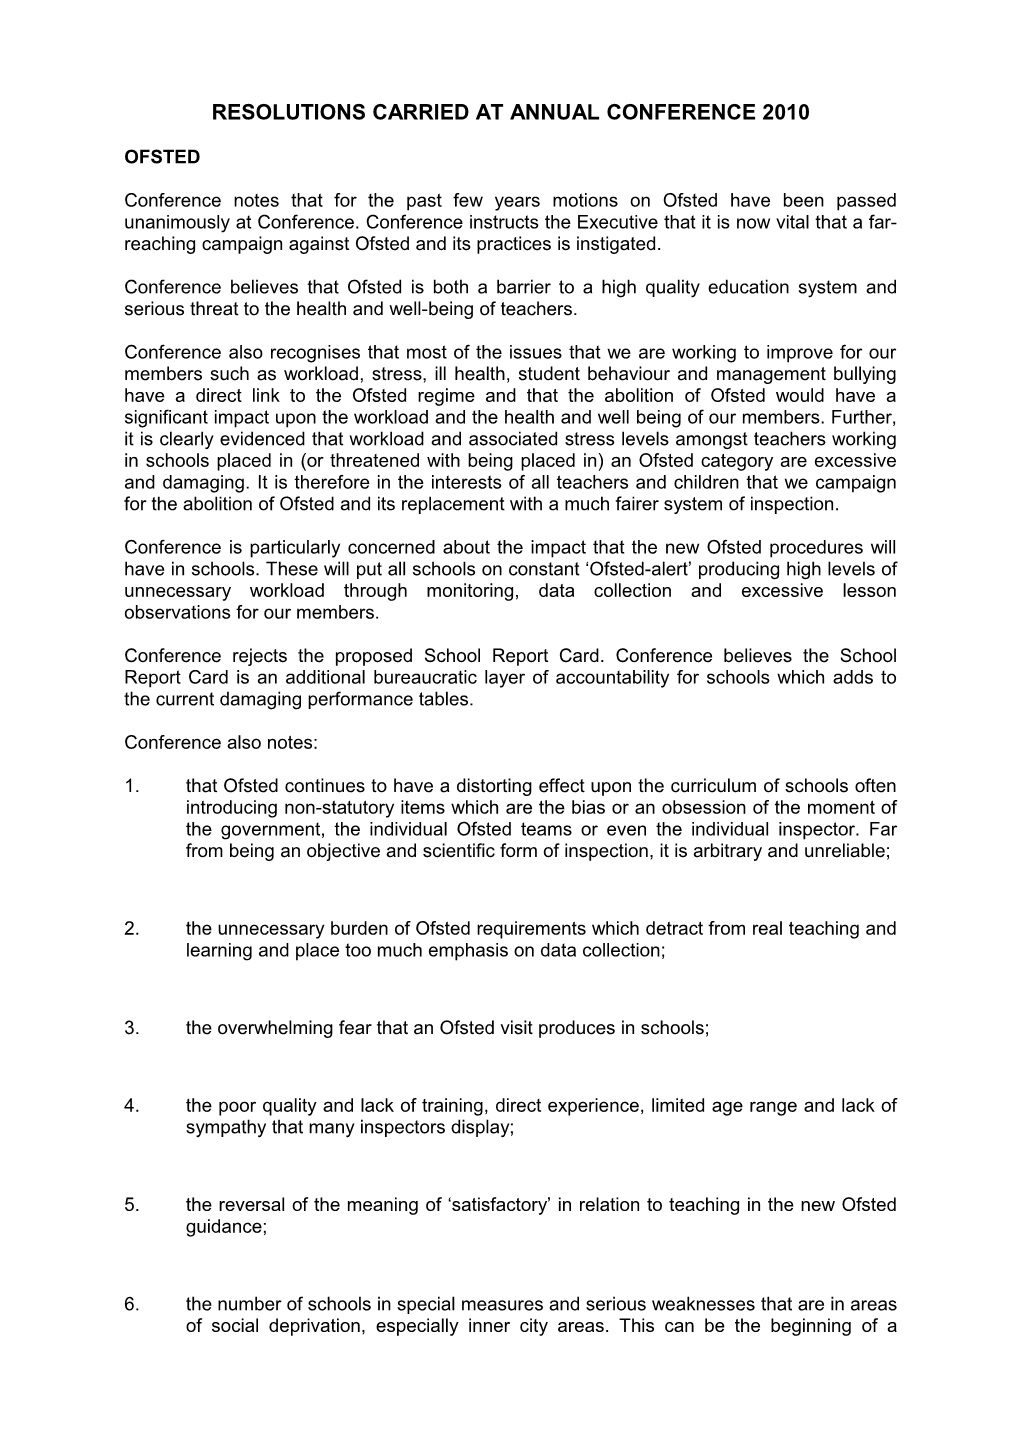 Resolutions Carried at Annual Conference 2010